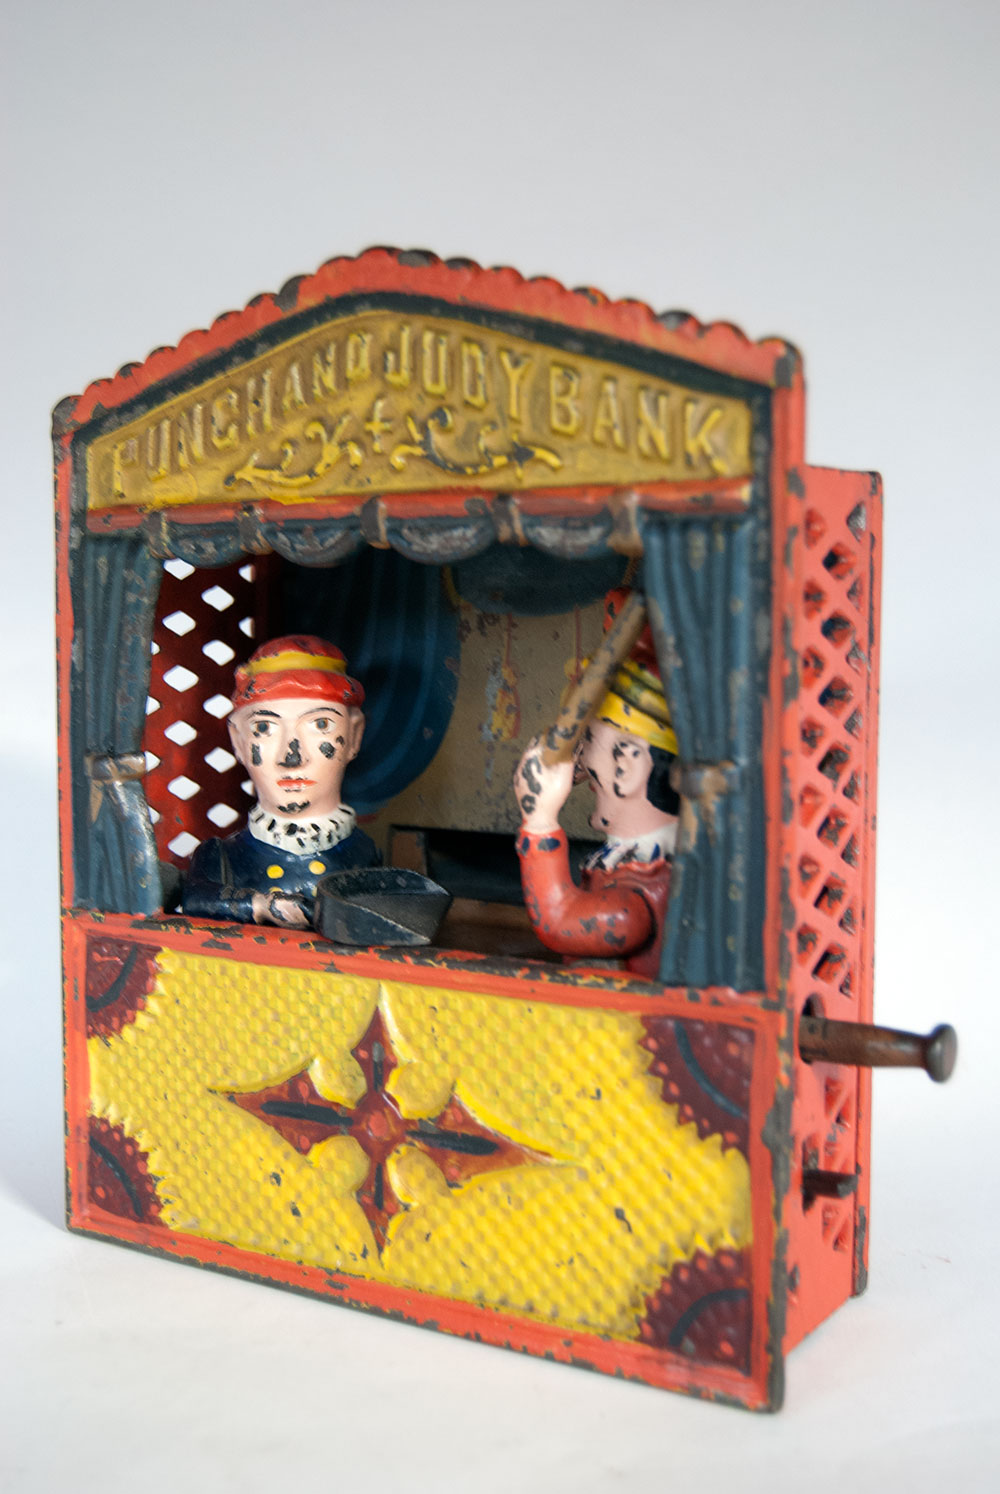 Punch and judy